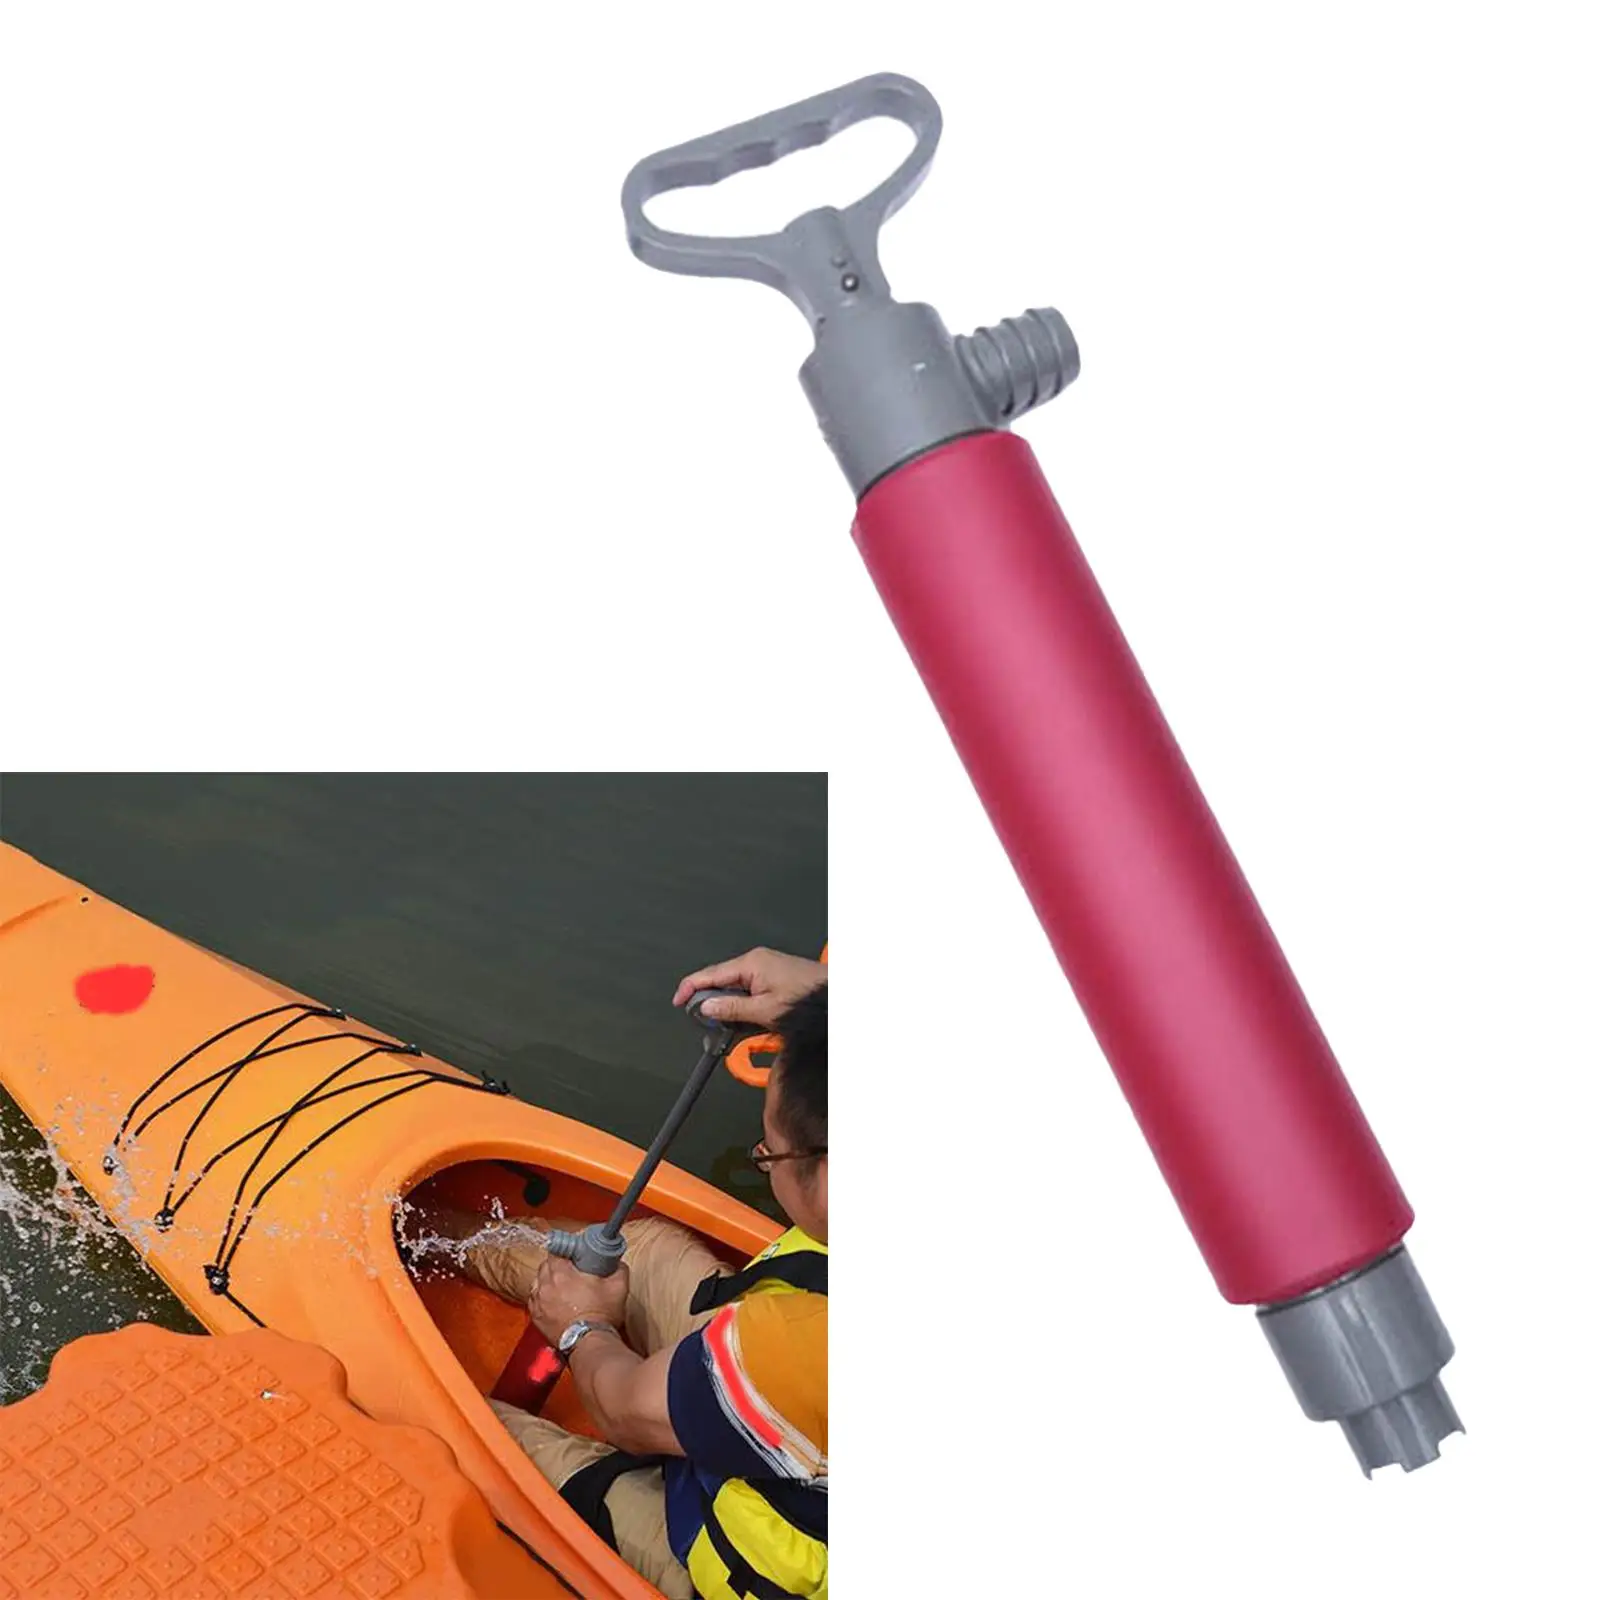 Floating Kayak Hand Pump for Kayakers Boats Survival Emergency Equipment